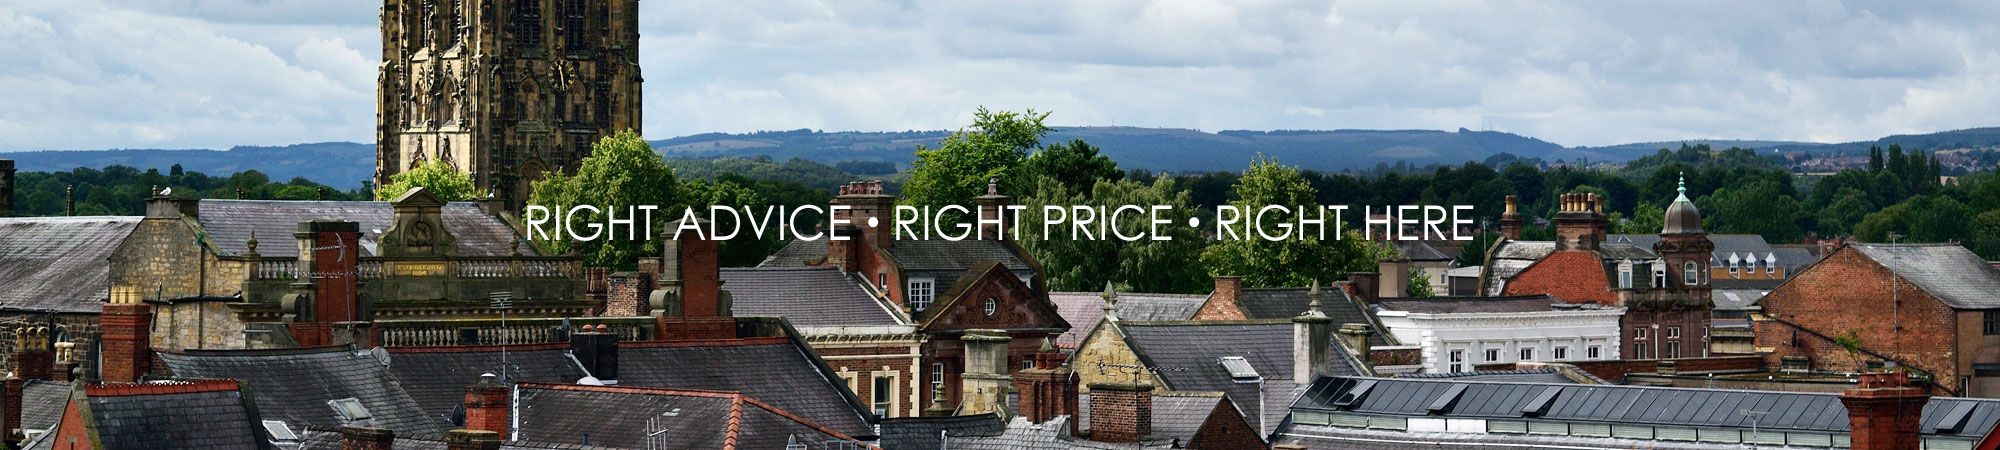 Right Advice • Right Price • Right Here tagline with Wrexham and North Wales scenery backdrop